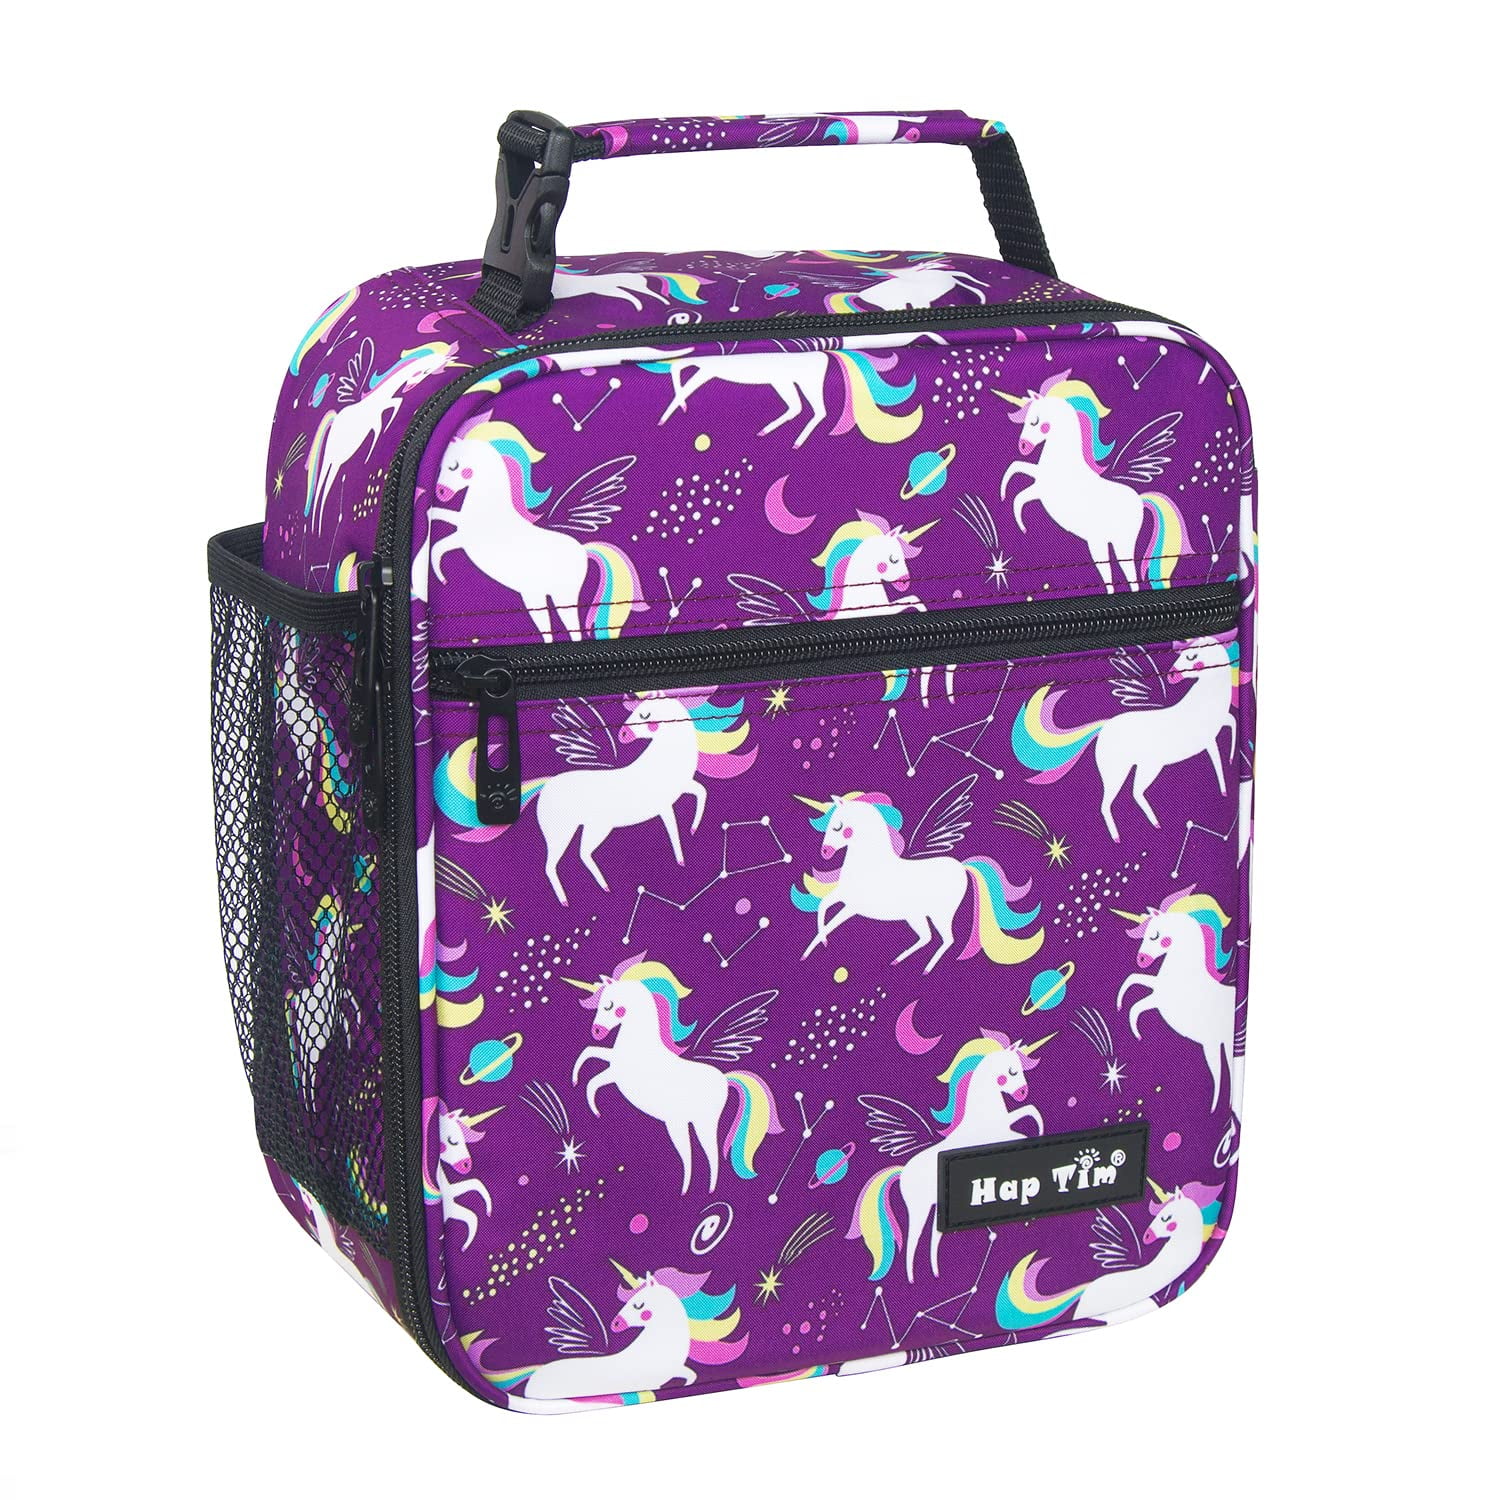 cuesr Purple Unicorn Lunch Box Kids Girls Boys Insulated Cooler Thermal  Cute Lunch Bag Tote for School